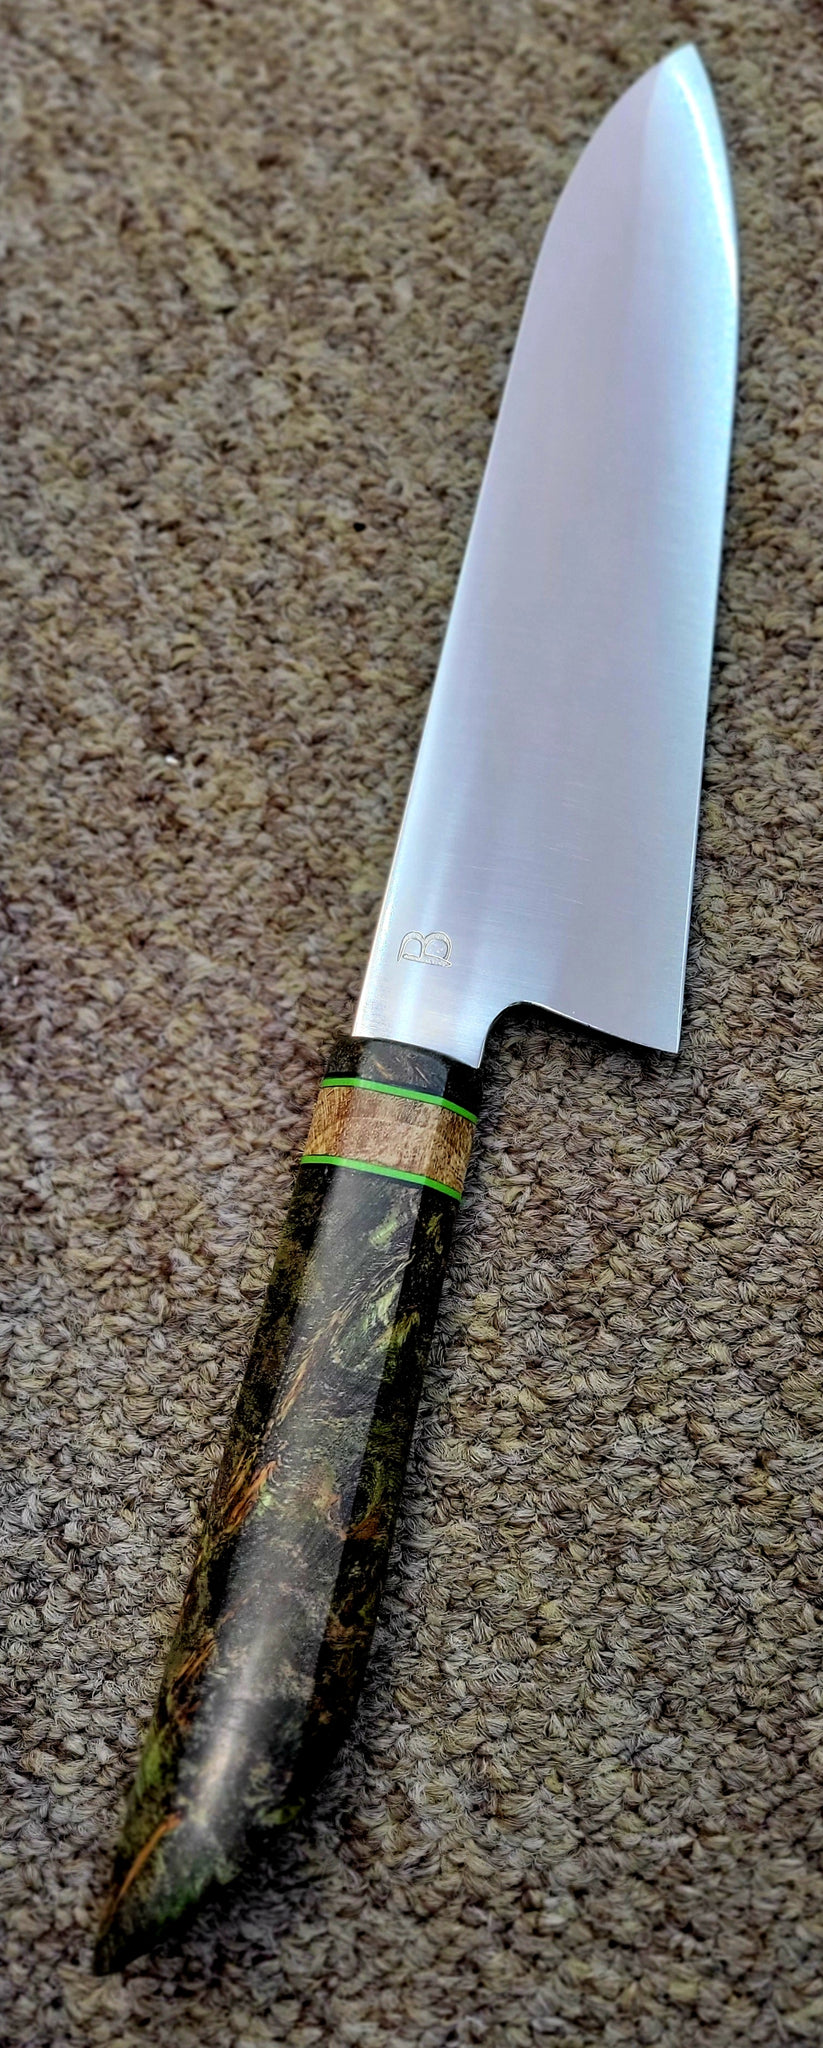 Baldwin Blades 6.75" Petty in 26C3 and Green Maple